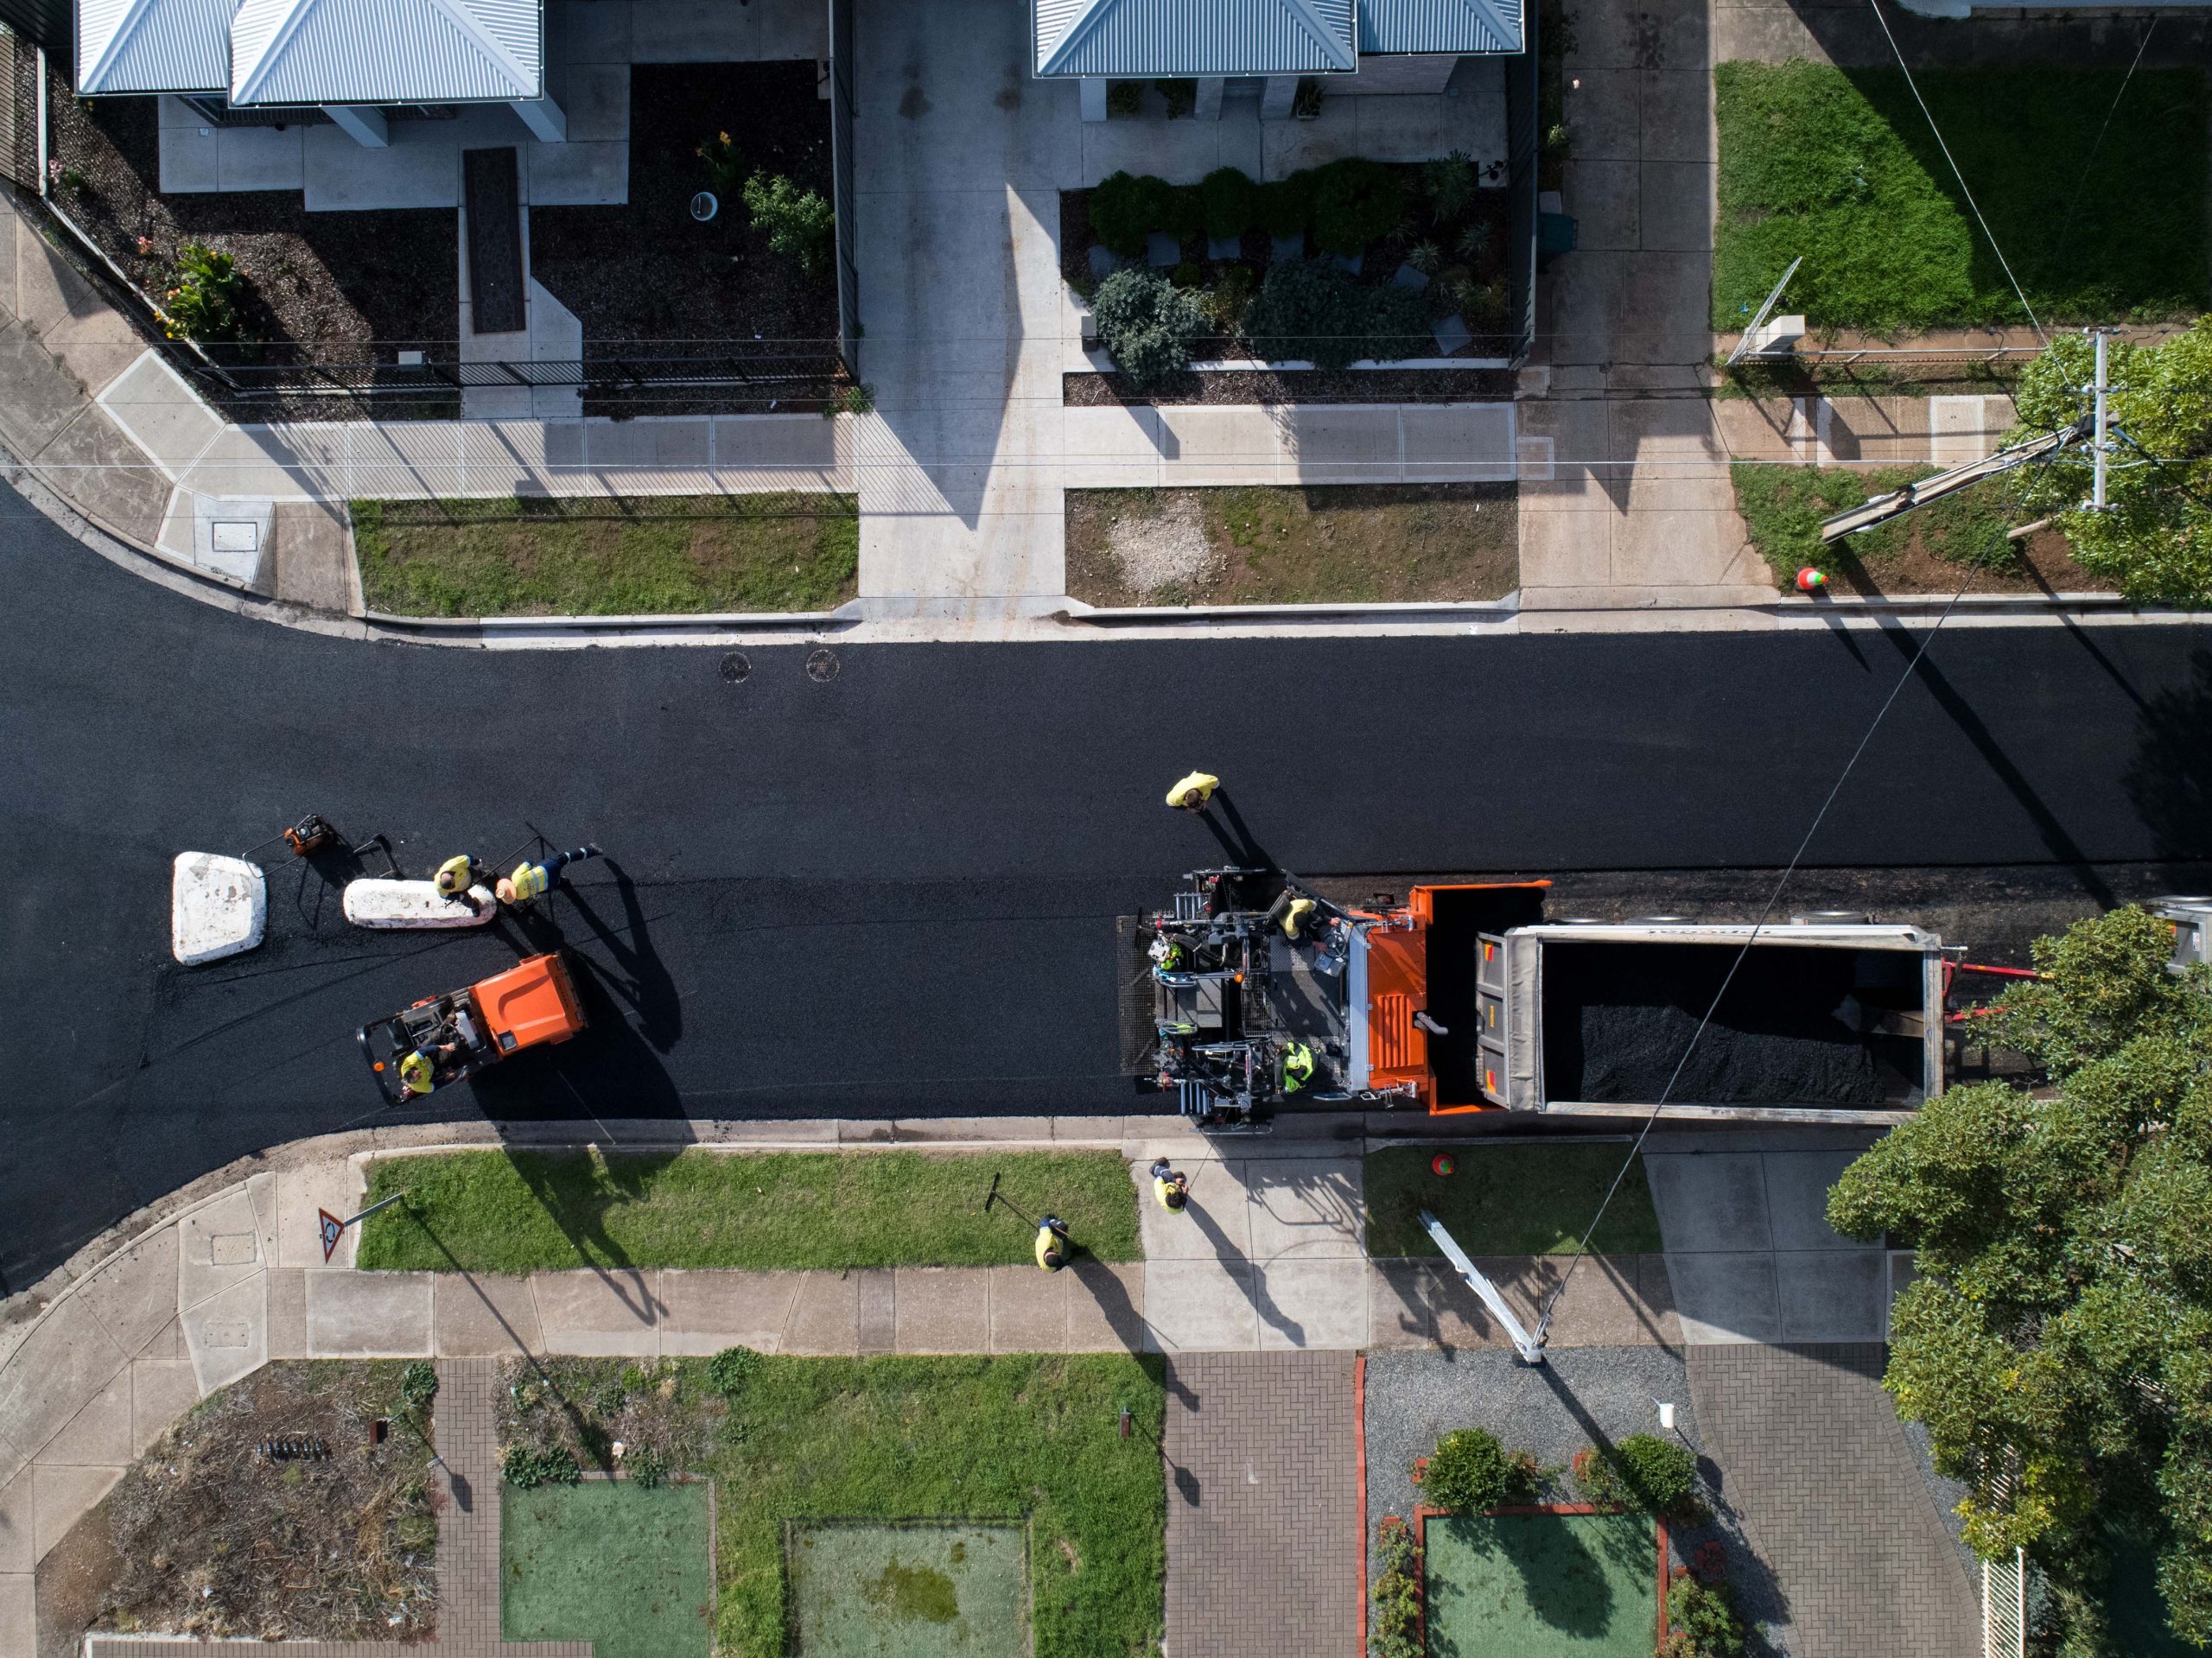 Queensland’s tyre circular economy starts with rubberised roads